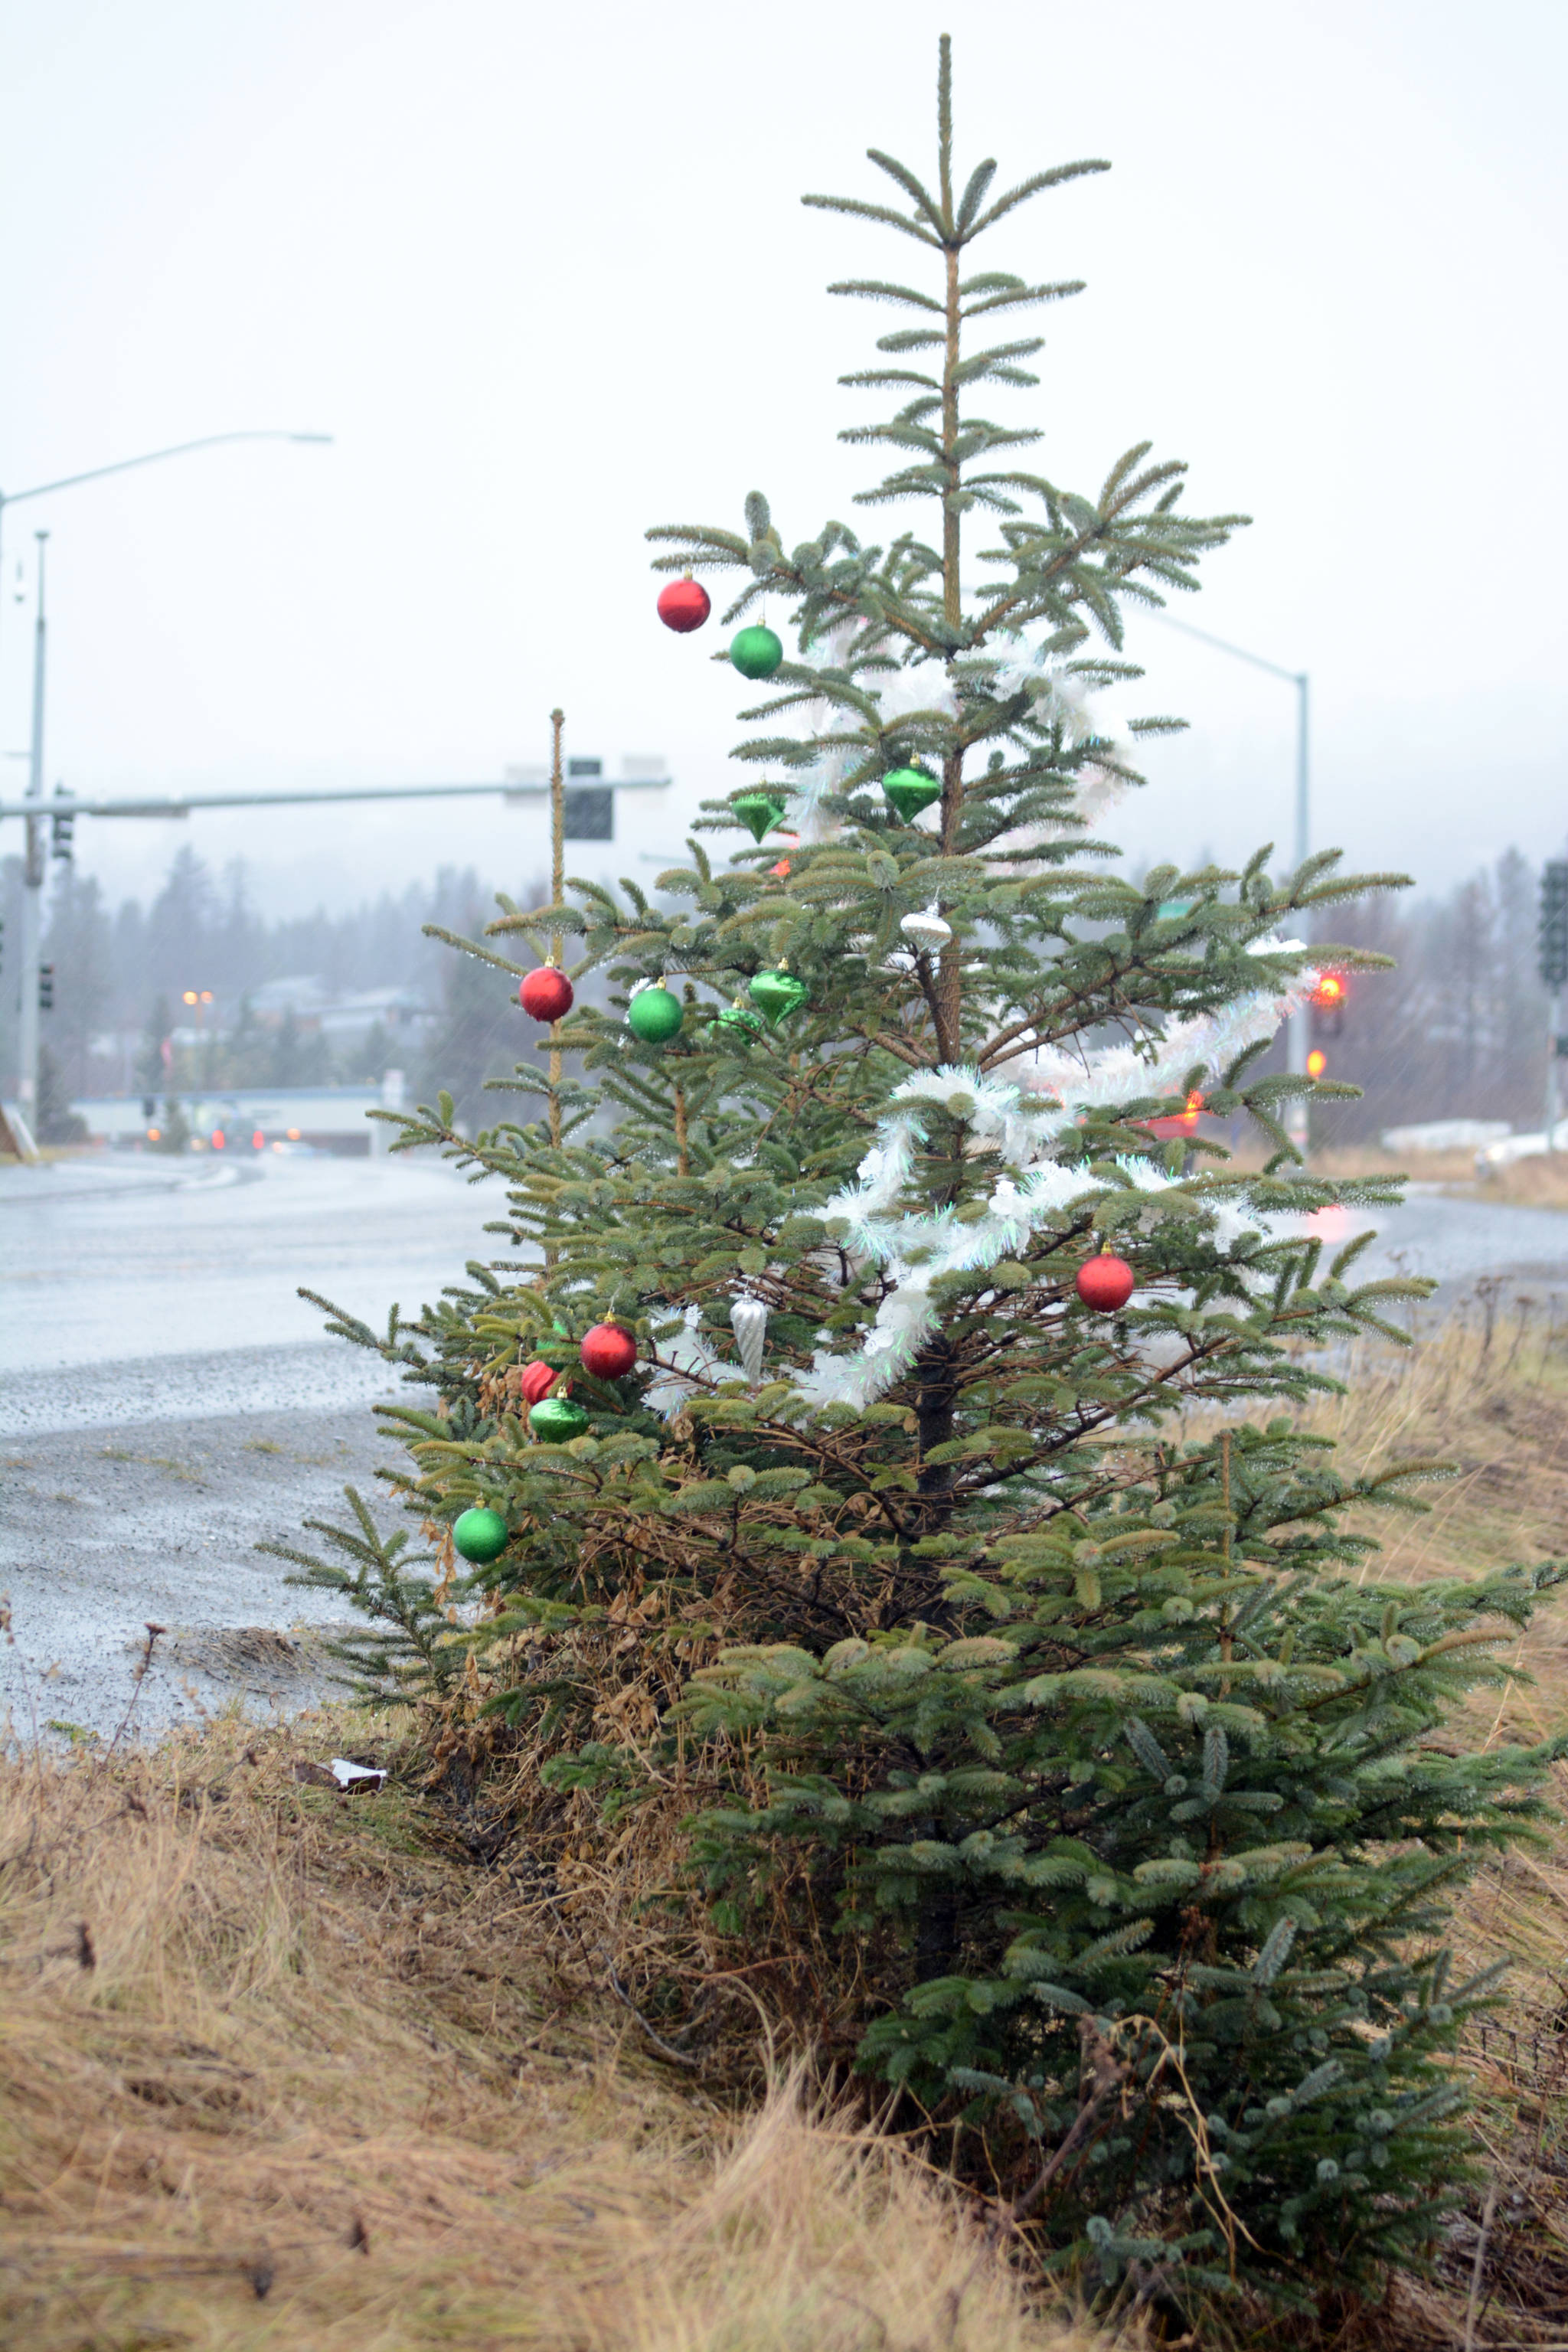 A secret Santa decorated a spruce tree by the side of the road, shown here on Friday, Dec. 15, 2017 near the Homer Bypass and Lake Street intersection in Homer, Alaska. (Photo by Michael Armstrong/Homer News)